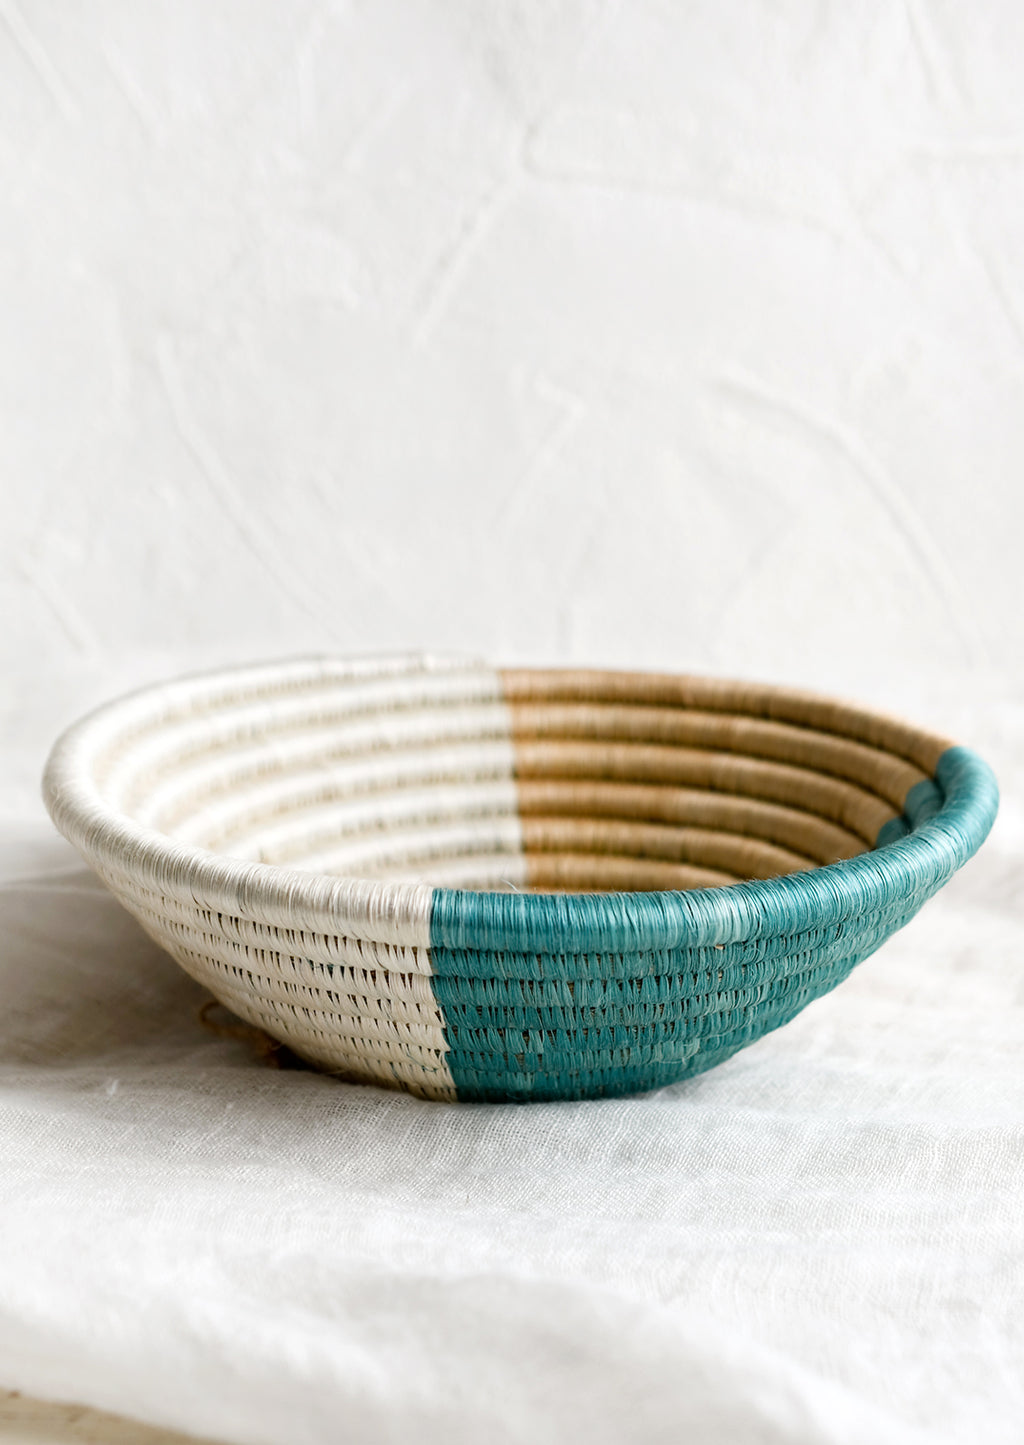 2: A round sweetgrass bowl in navy pattern.